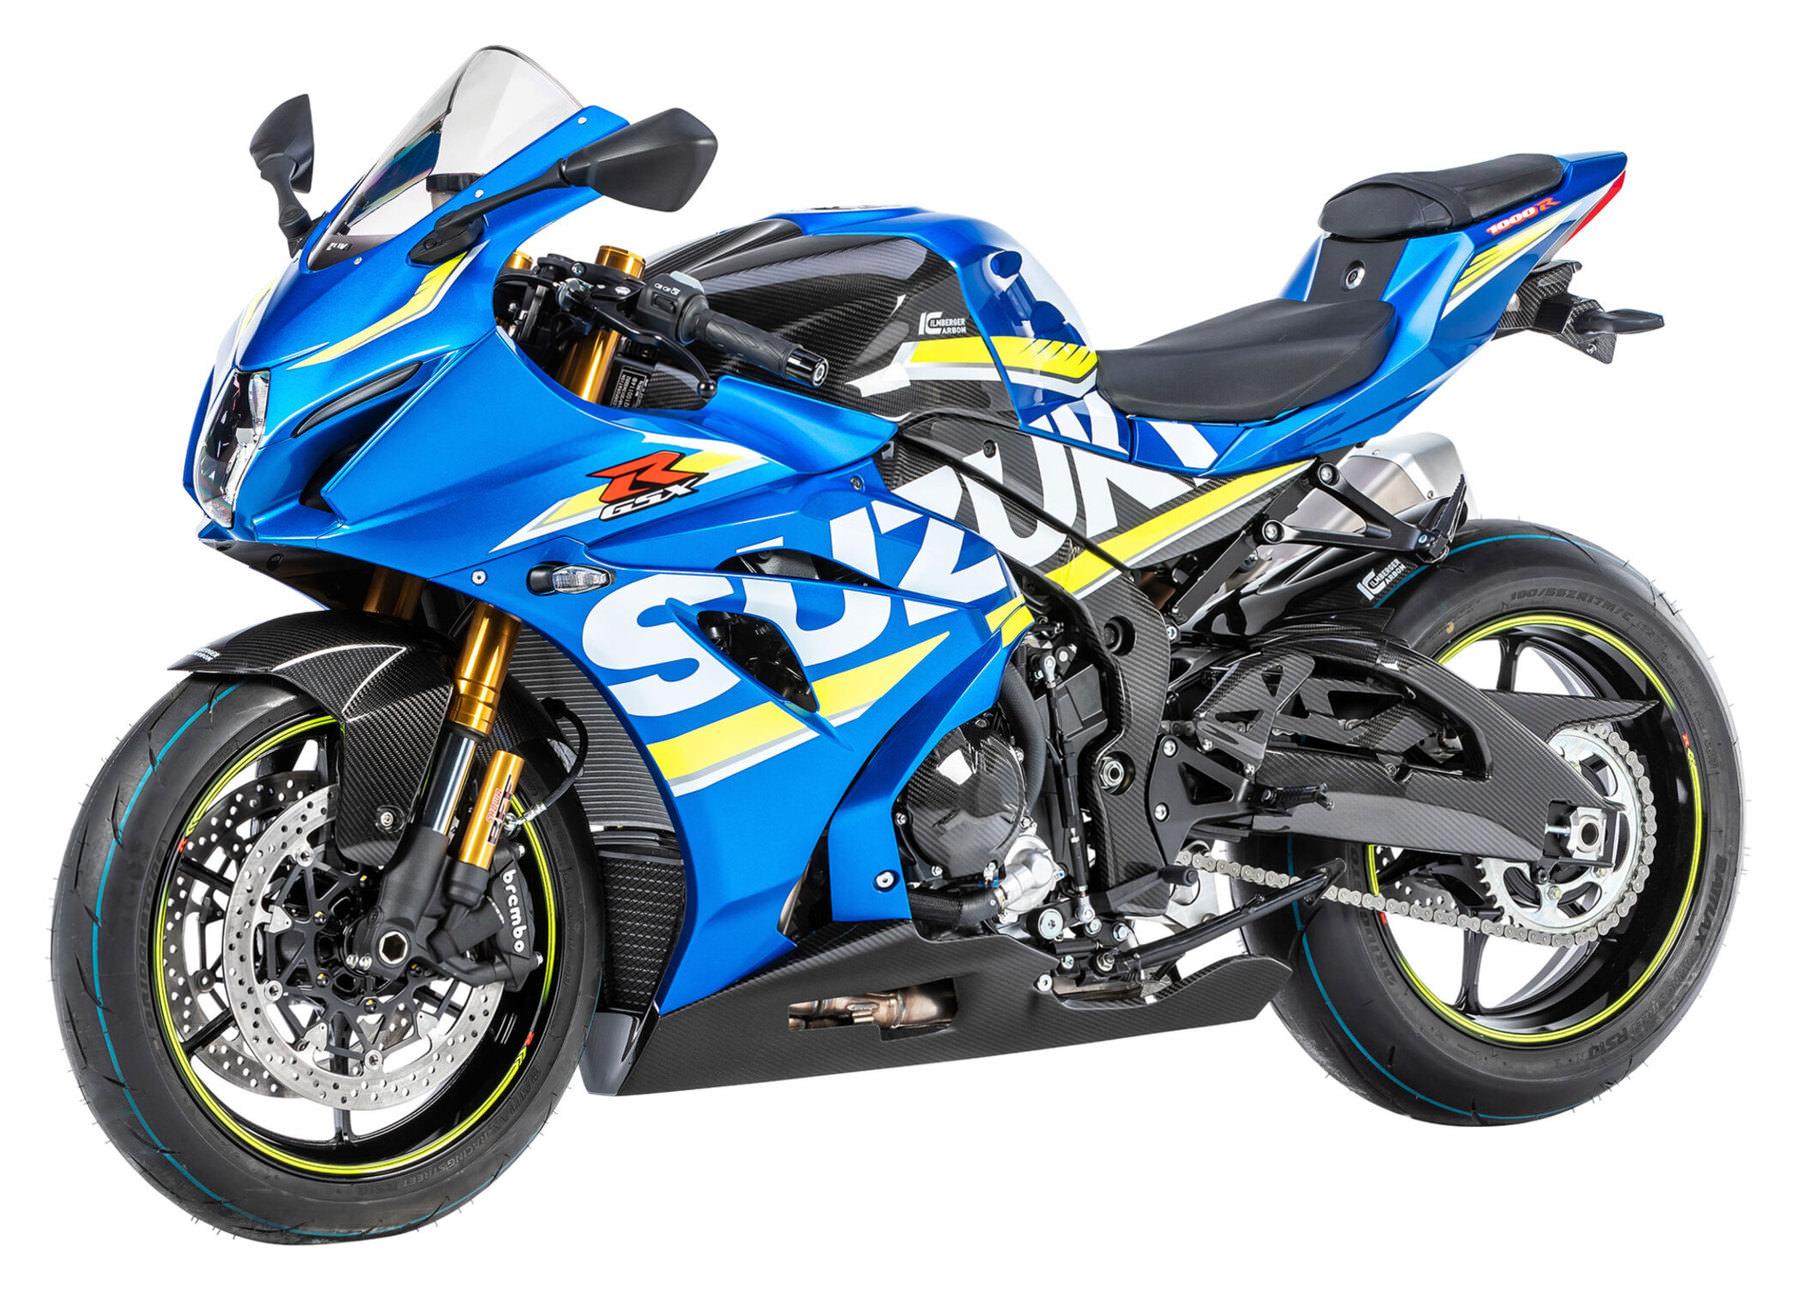 Buy Carbon parts for Suzuki GSX-R1000/R 17- | Louis motorcycle clothing and  technology